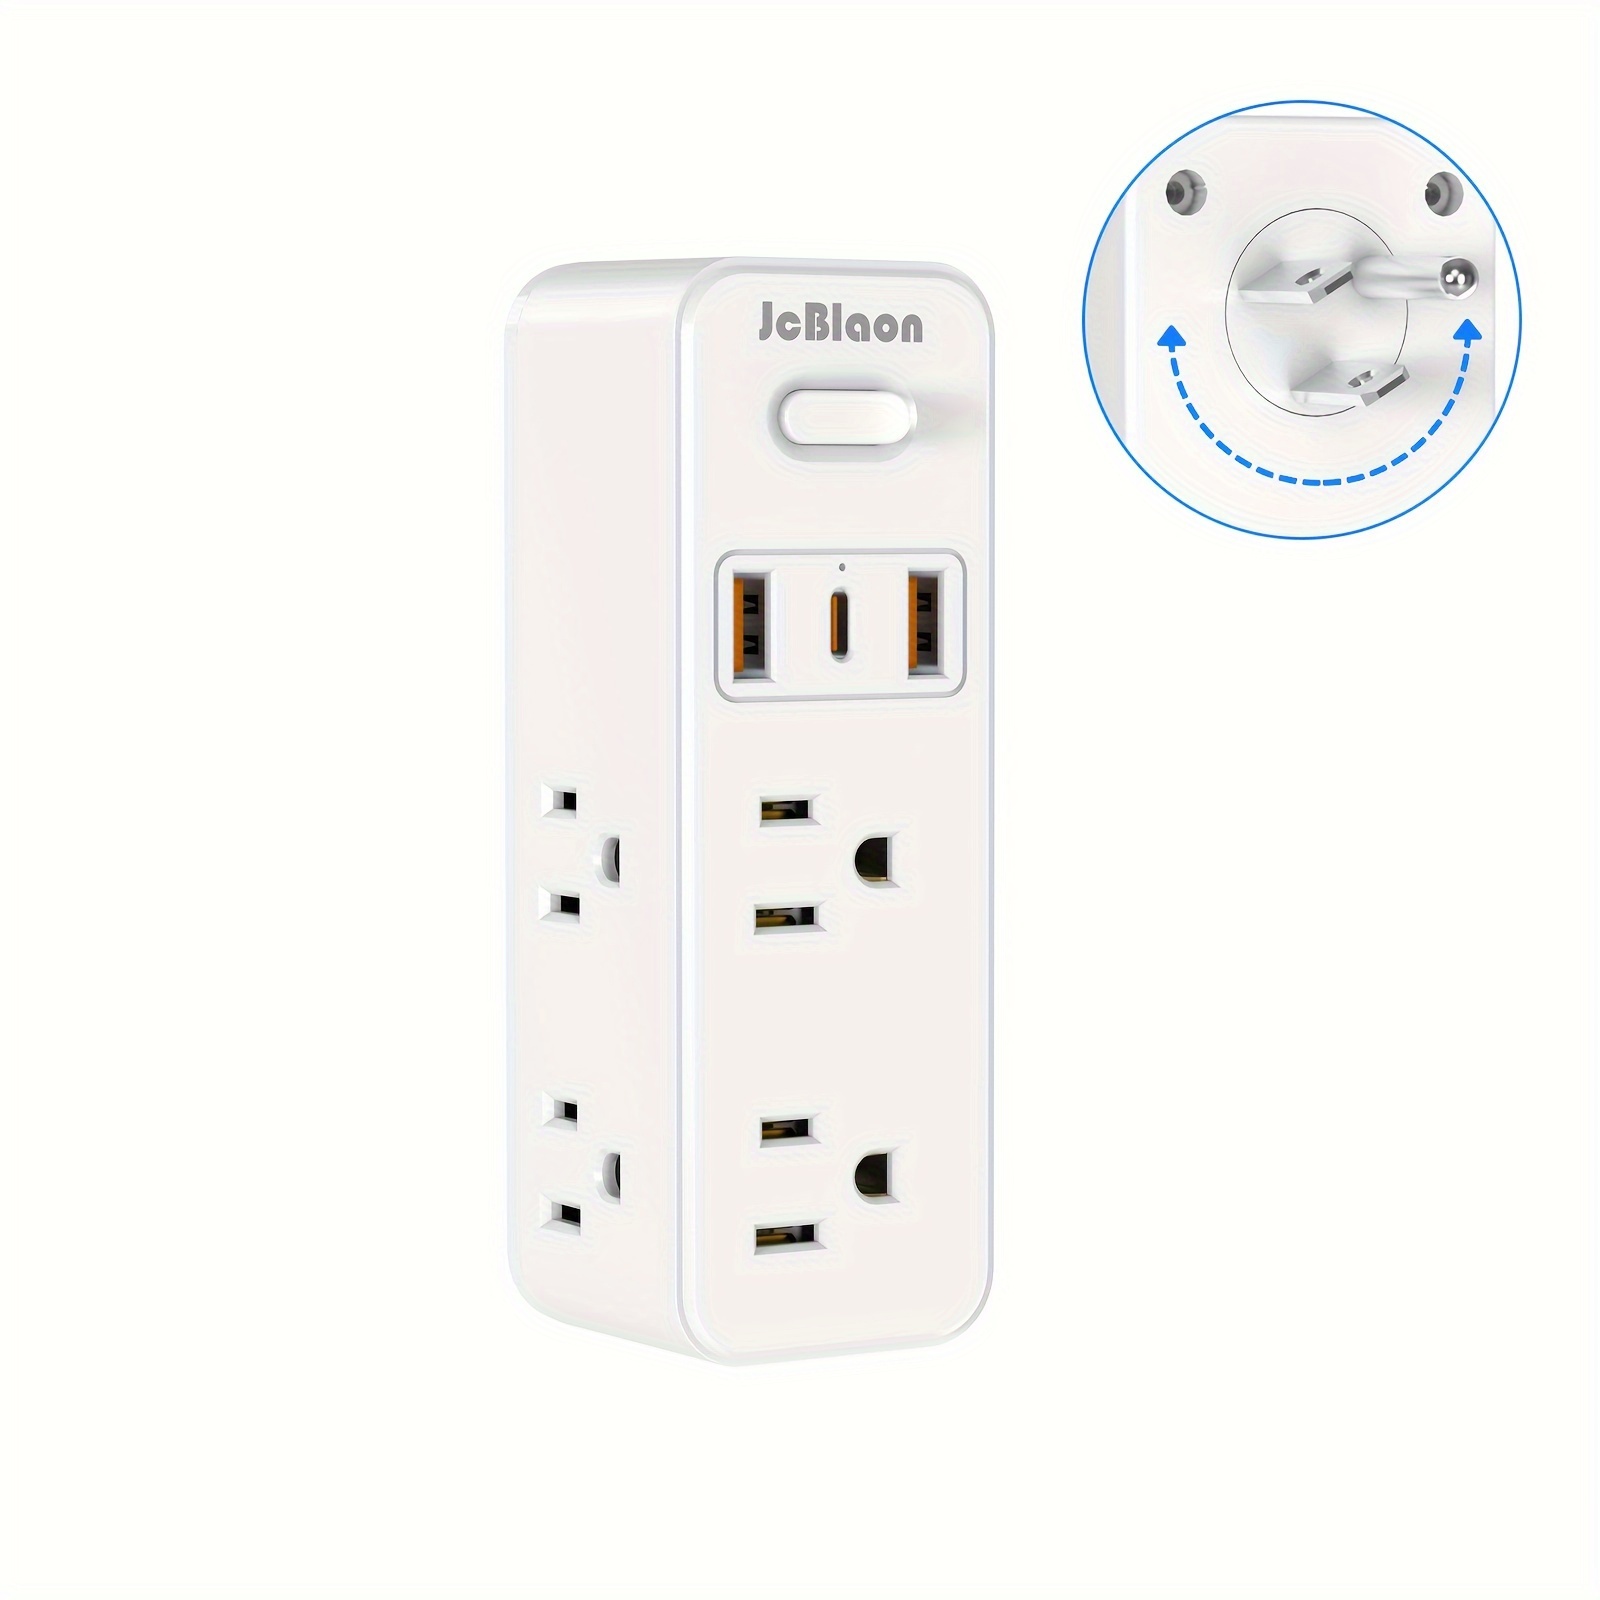 

Protector Outlet Extender- Multi Plug Wall Outlet With Rotating Outlet Adapter, 6 Ac Outlet Splitter With 3 Usb Ports (1 Usb C), 3-sided Outlet Adapter Compact Charge For Home Travel Office